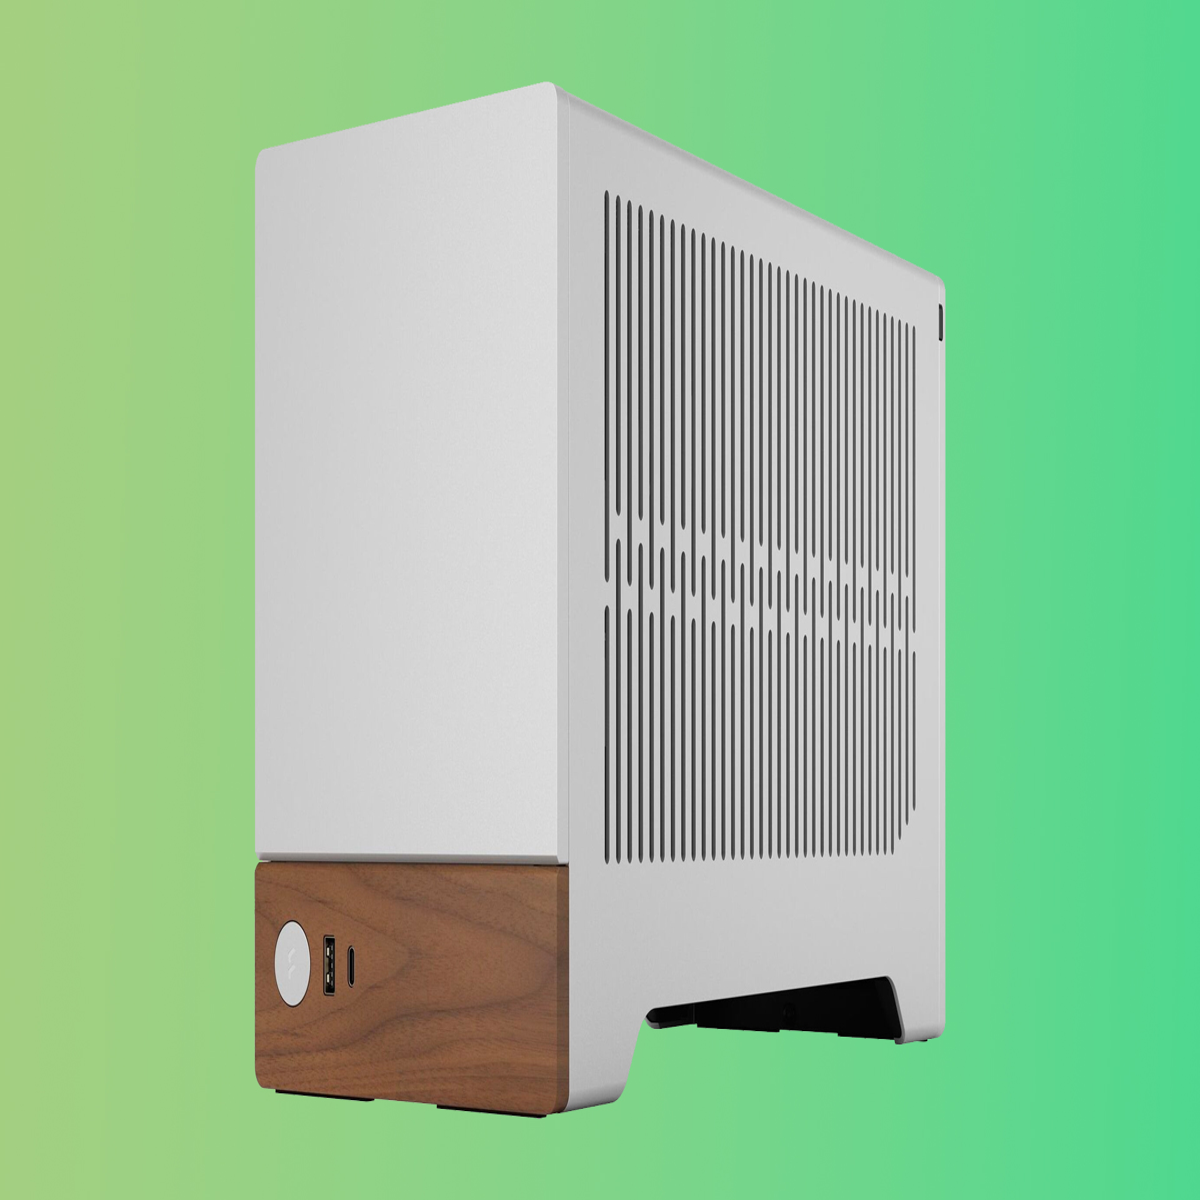 This diddy little Fractal Terra PC case has received a big discount with an   code